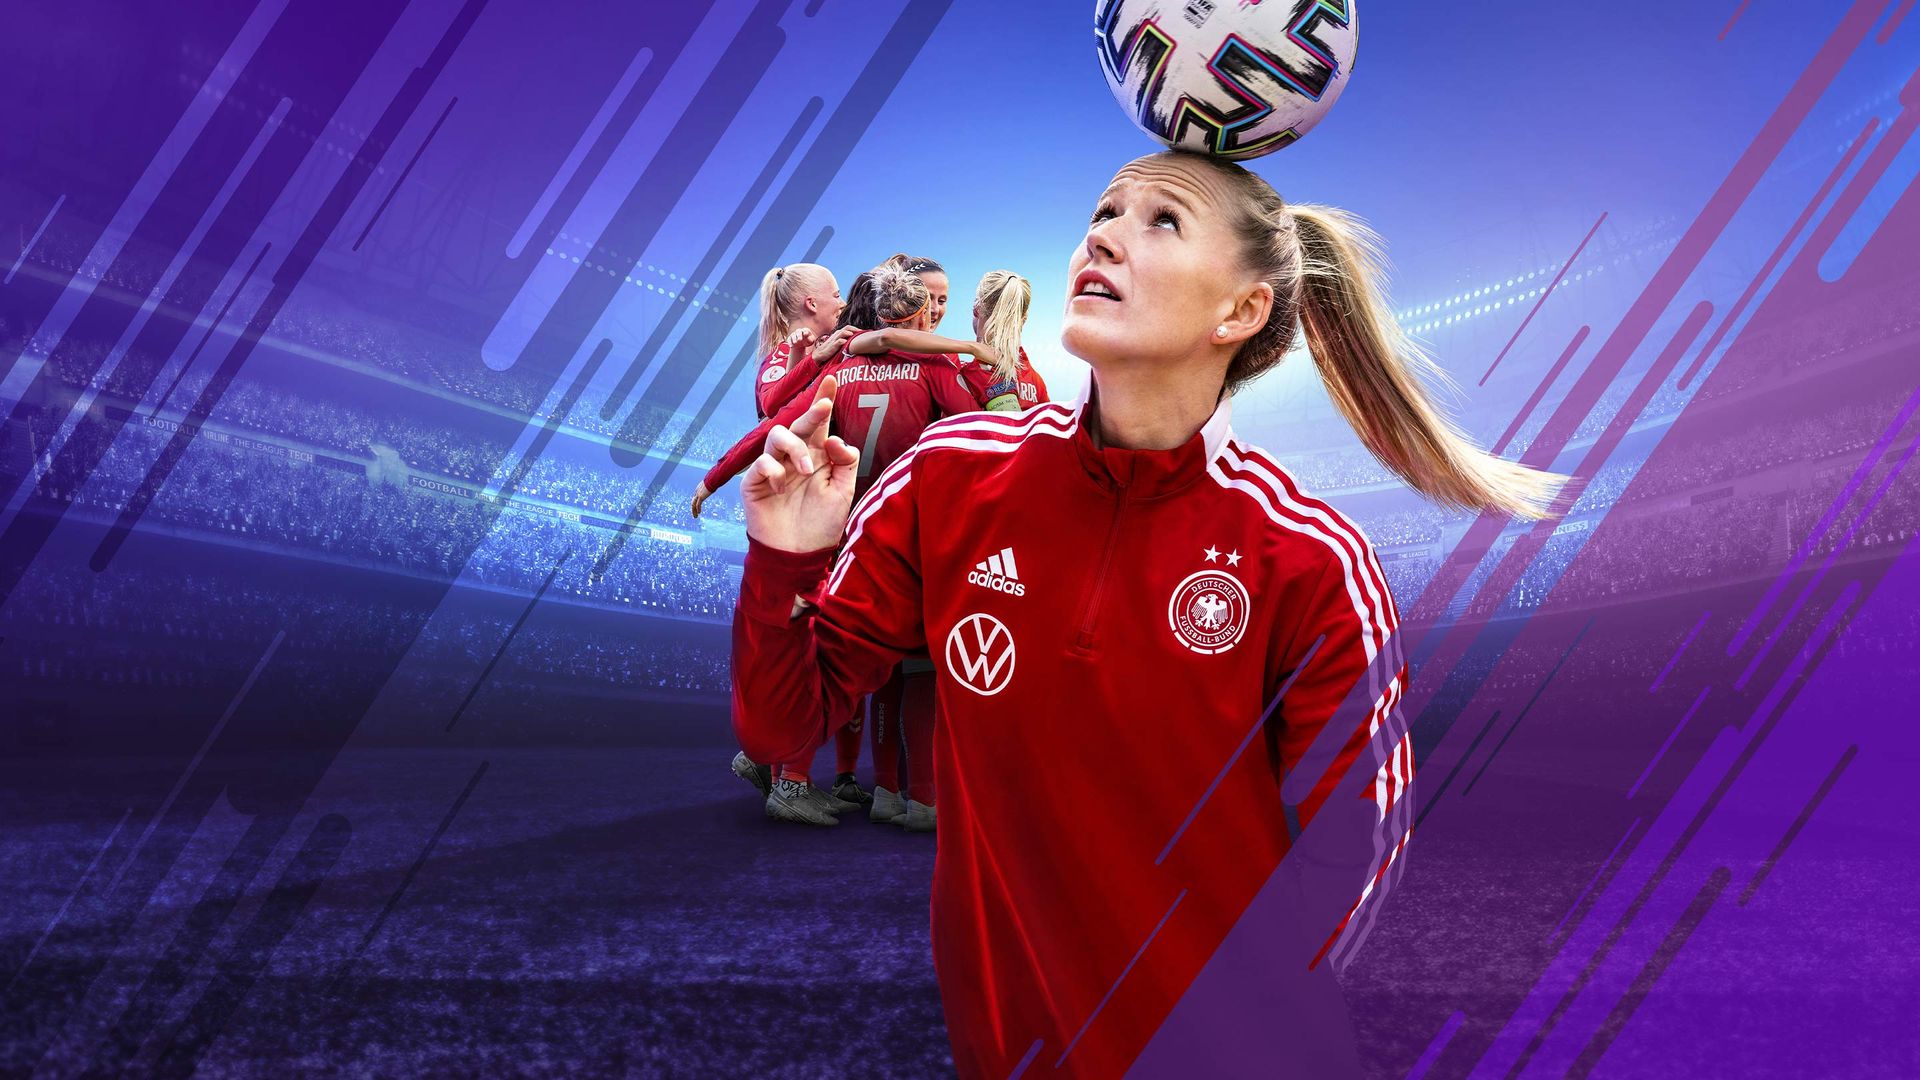 FIFA Womens World Cup Qualifiers ⚽️ Watch Live Soccer Matches on Paramount Plus